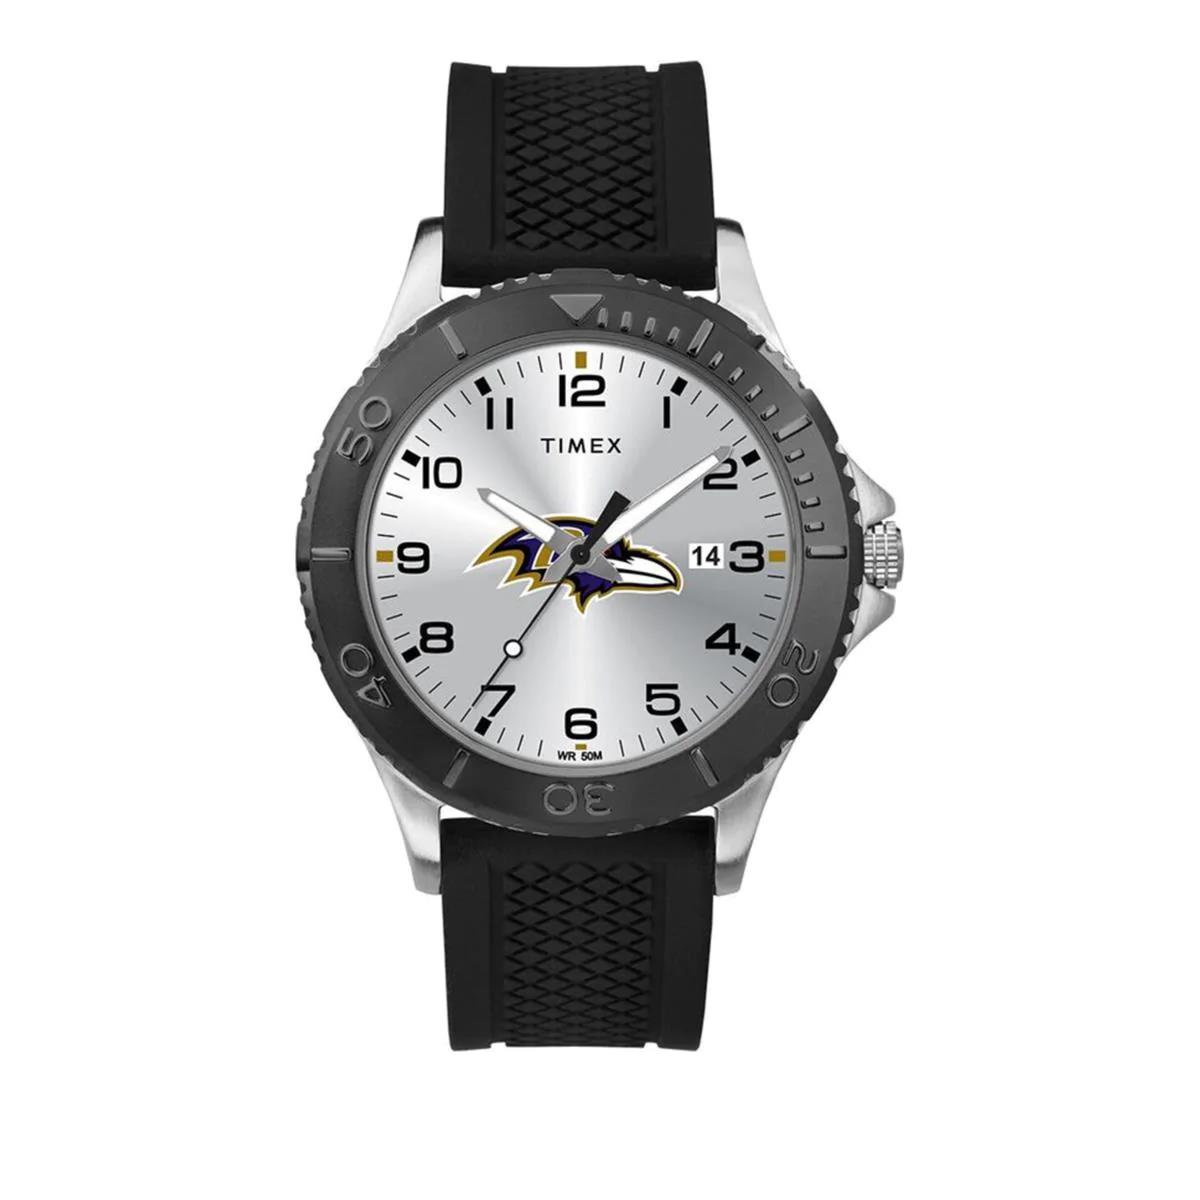 Officially Licensed Nfl Men`s Gamer Watch By Timex 630075-J